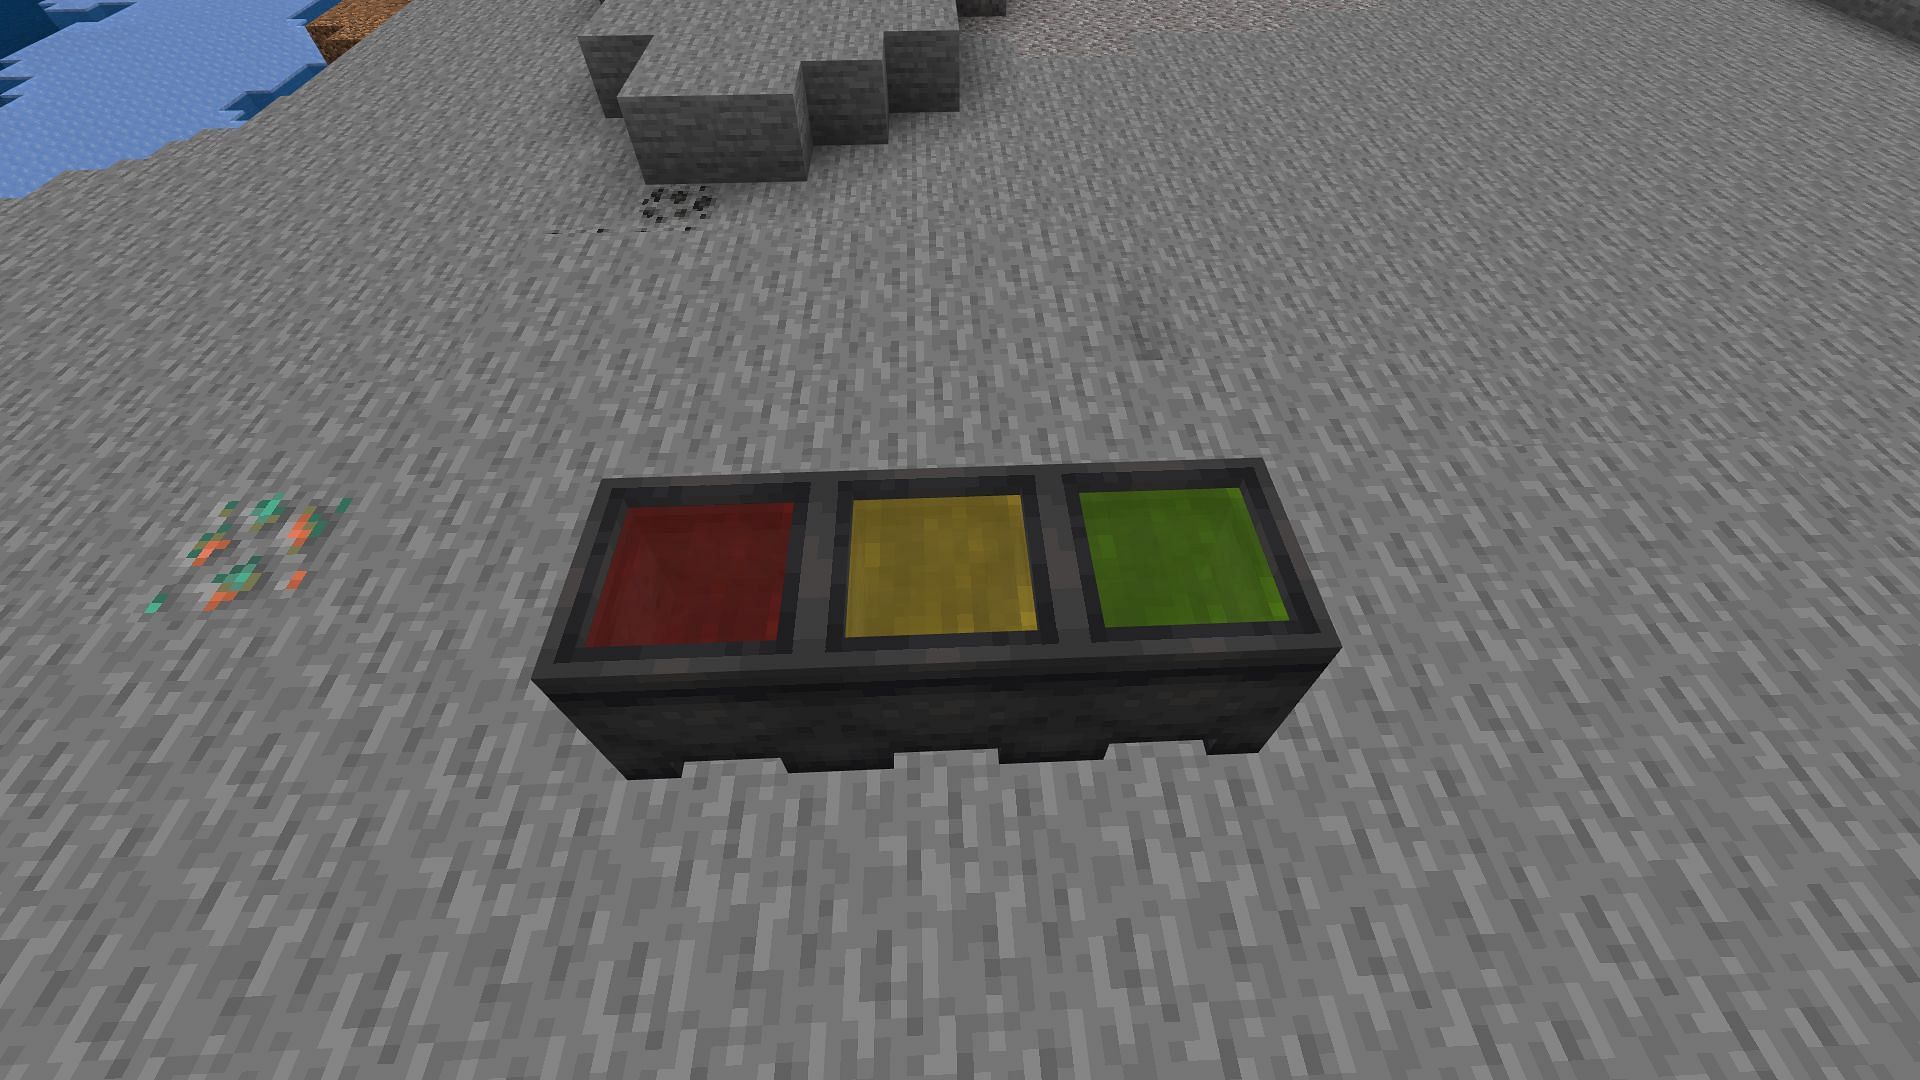 Dyeing materials in cauldrons have been a nice quality-of-life feature in Minecraft Bedrock (Image via Mojang)